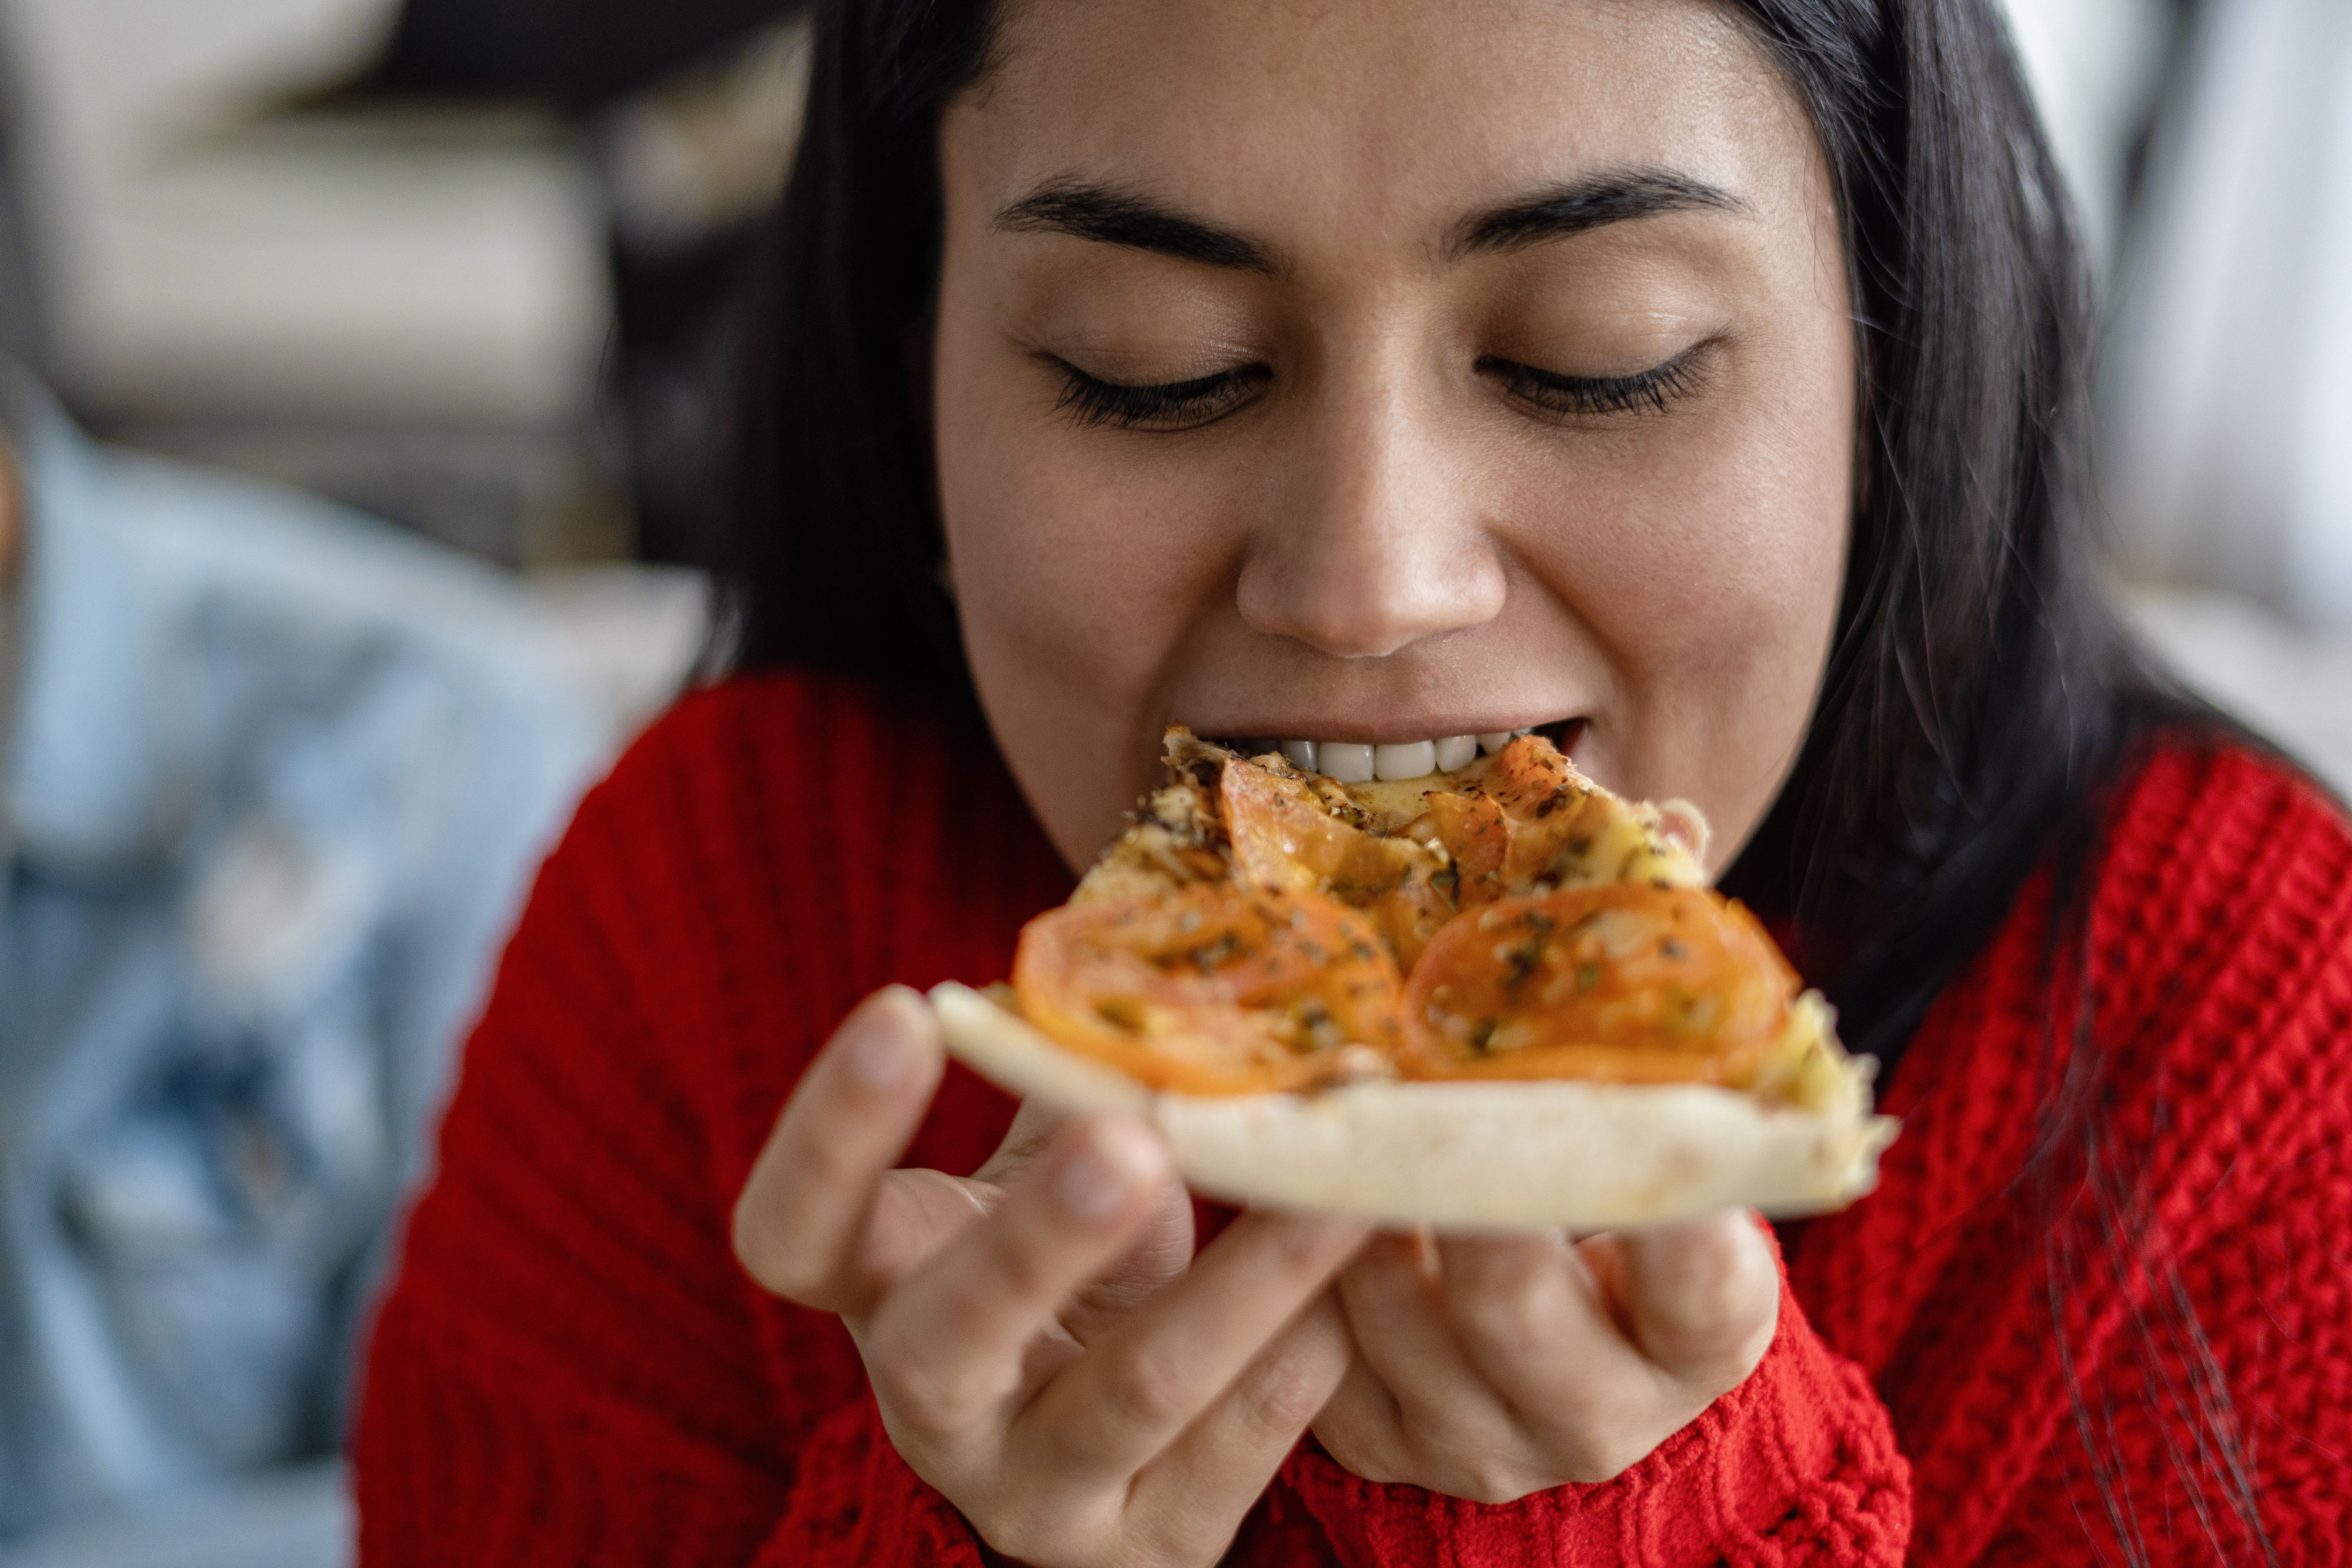 A woman biting a slice of pizza. She has dark hair and is wearing a red knitted sweater. She is looking down as she bites into it.